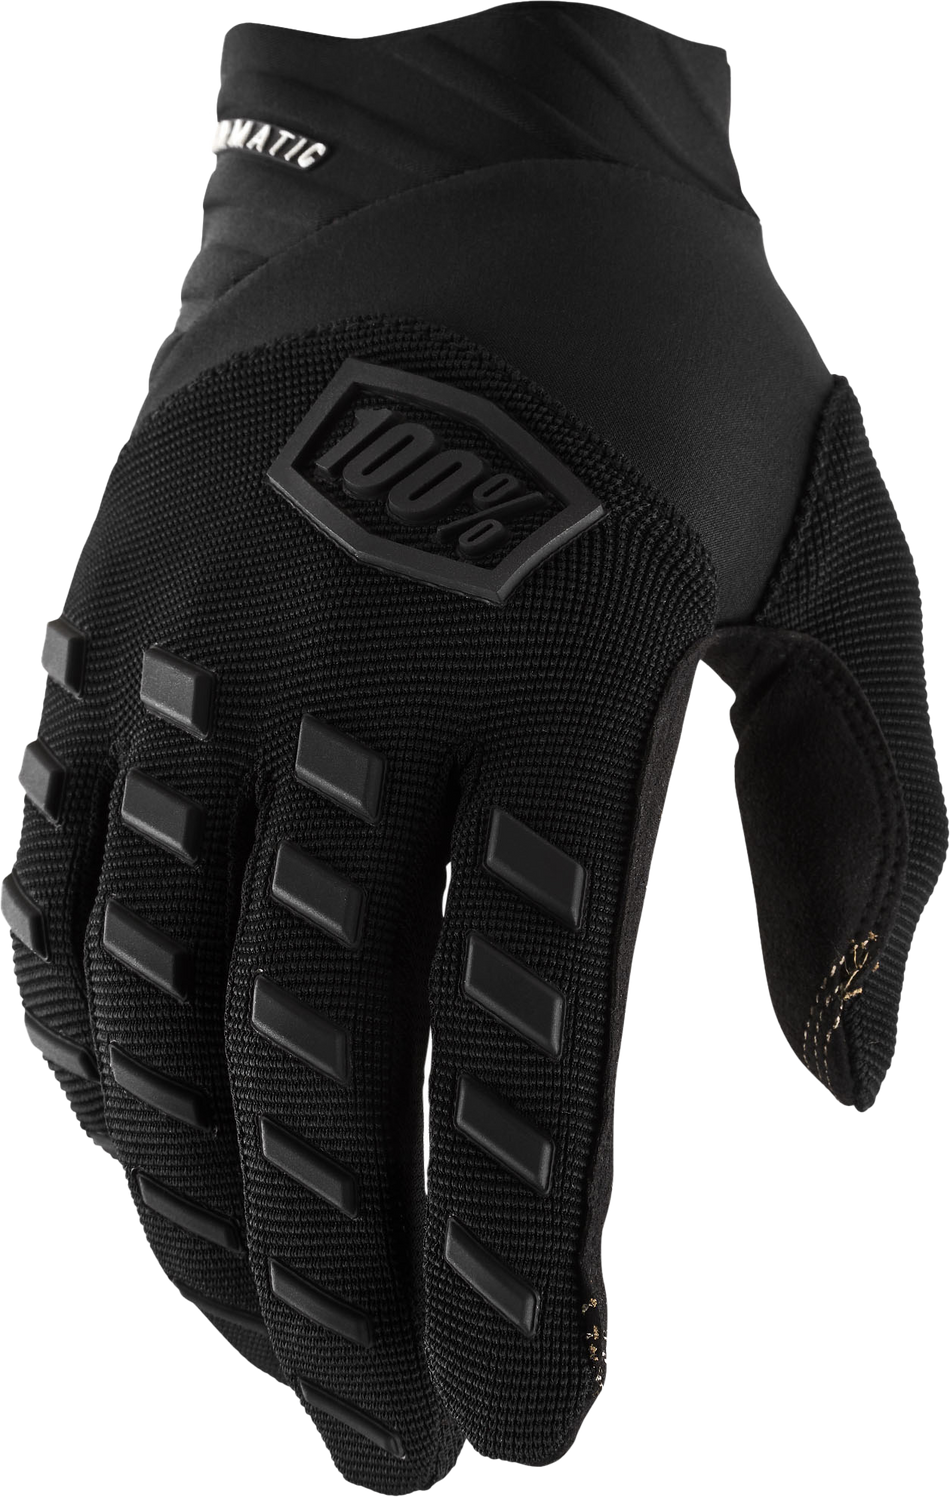 100% Airmatic Youth Gloves Black/Charcoal Xl 10001-00003